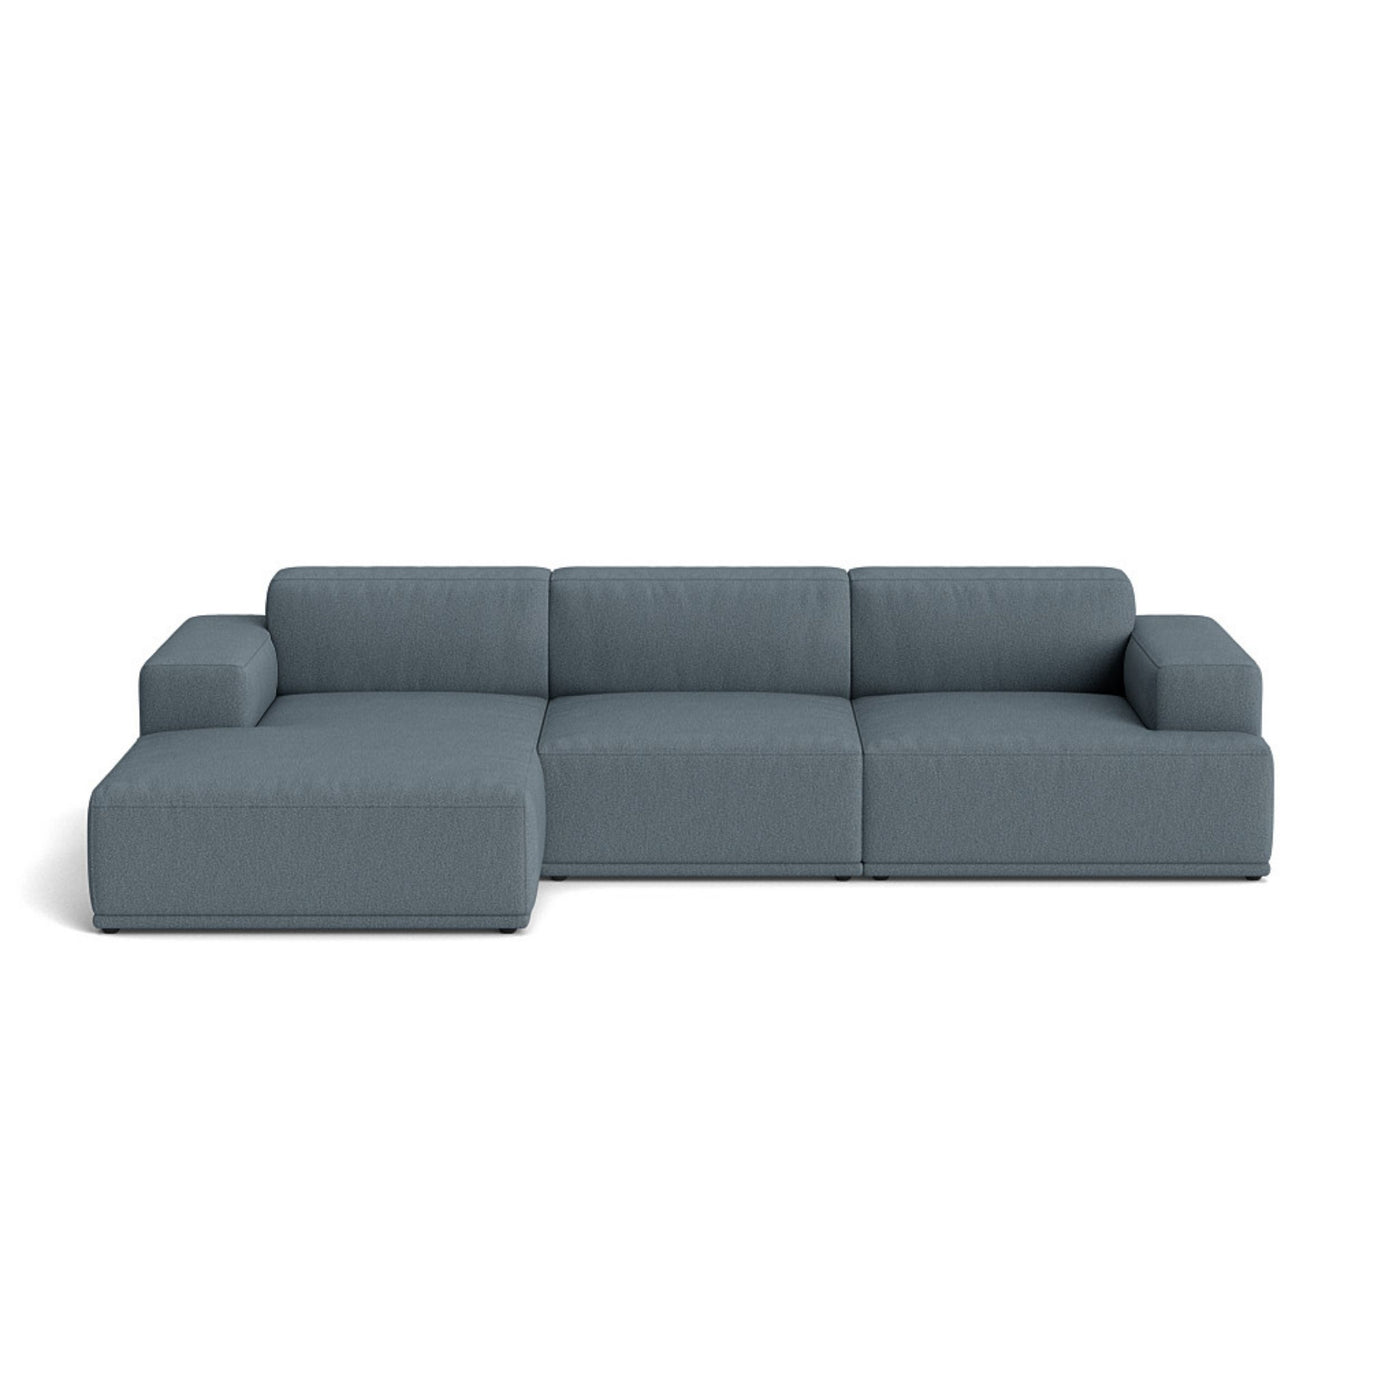 Muuto Connect Soft Modular 3 Seater Sofa, configuration 2. Made-to-order from someday designs. #colour_clay-1-blue